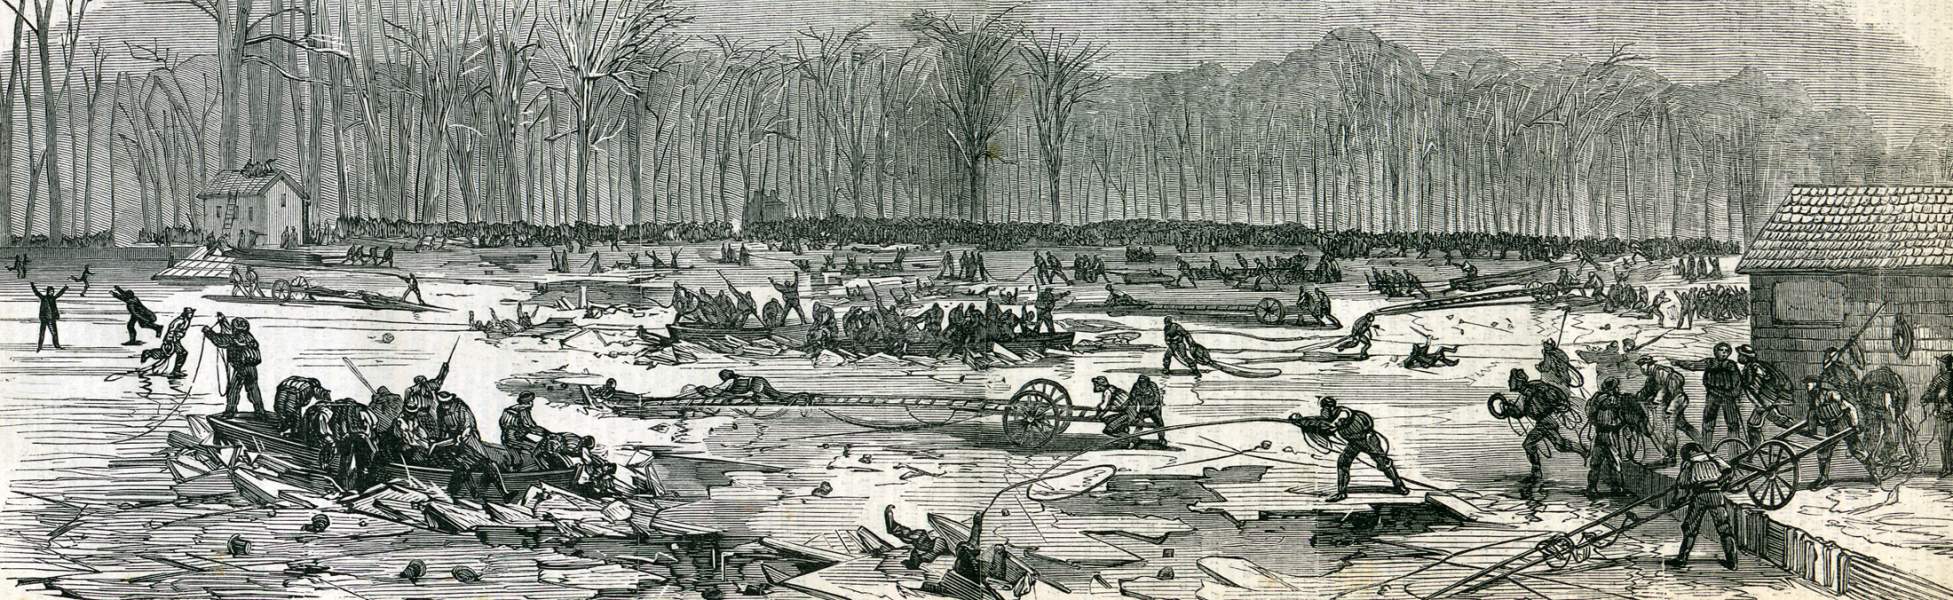 Disaster on the ice in Regent's Park, London, January 15, 1867, artist's impression, zoomable image.